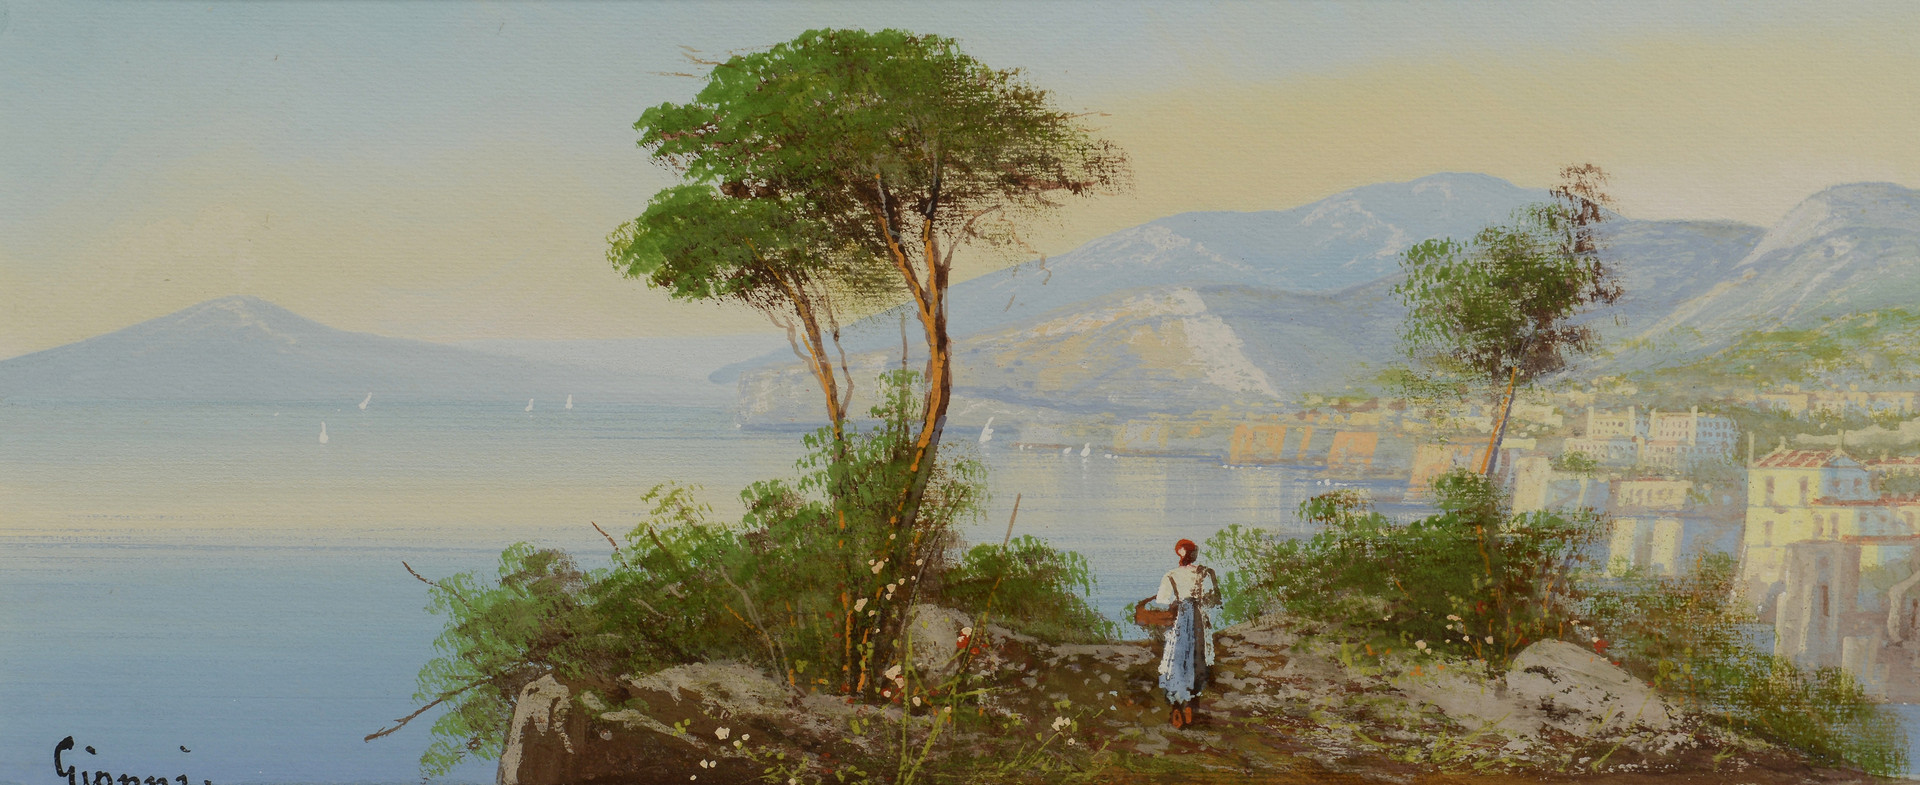 Lot 211: Pair Italian Landscapes, signed